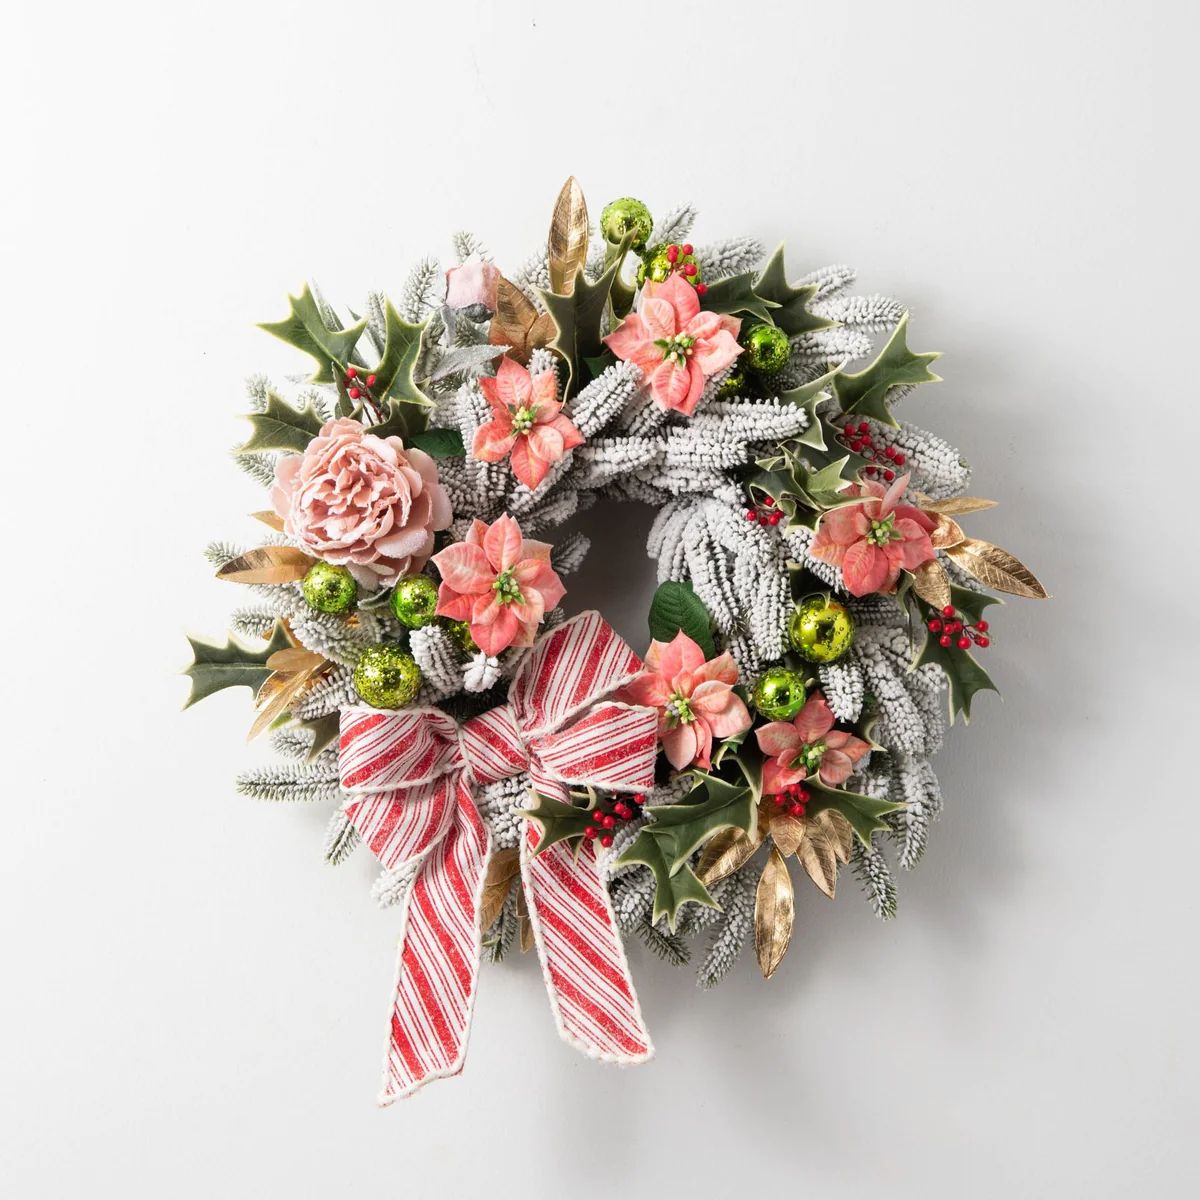 Cindy Lou Who - Snowy Pink Peony & Frosty Peppermint Stripe Bow Festive Christmas Front Door Wrea... | Darby Creek Trading